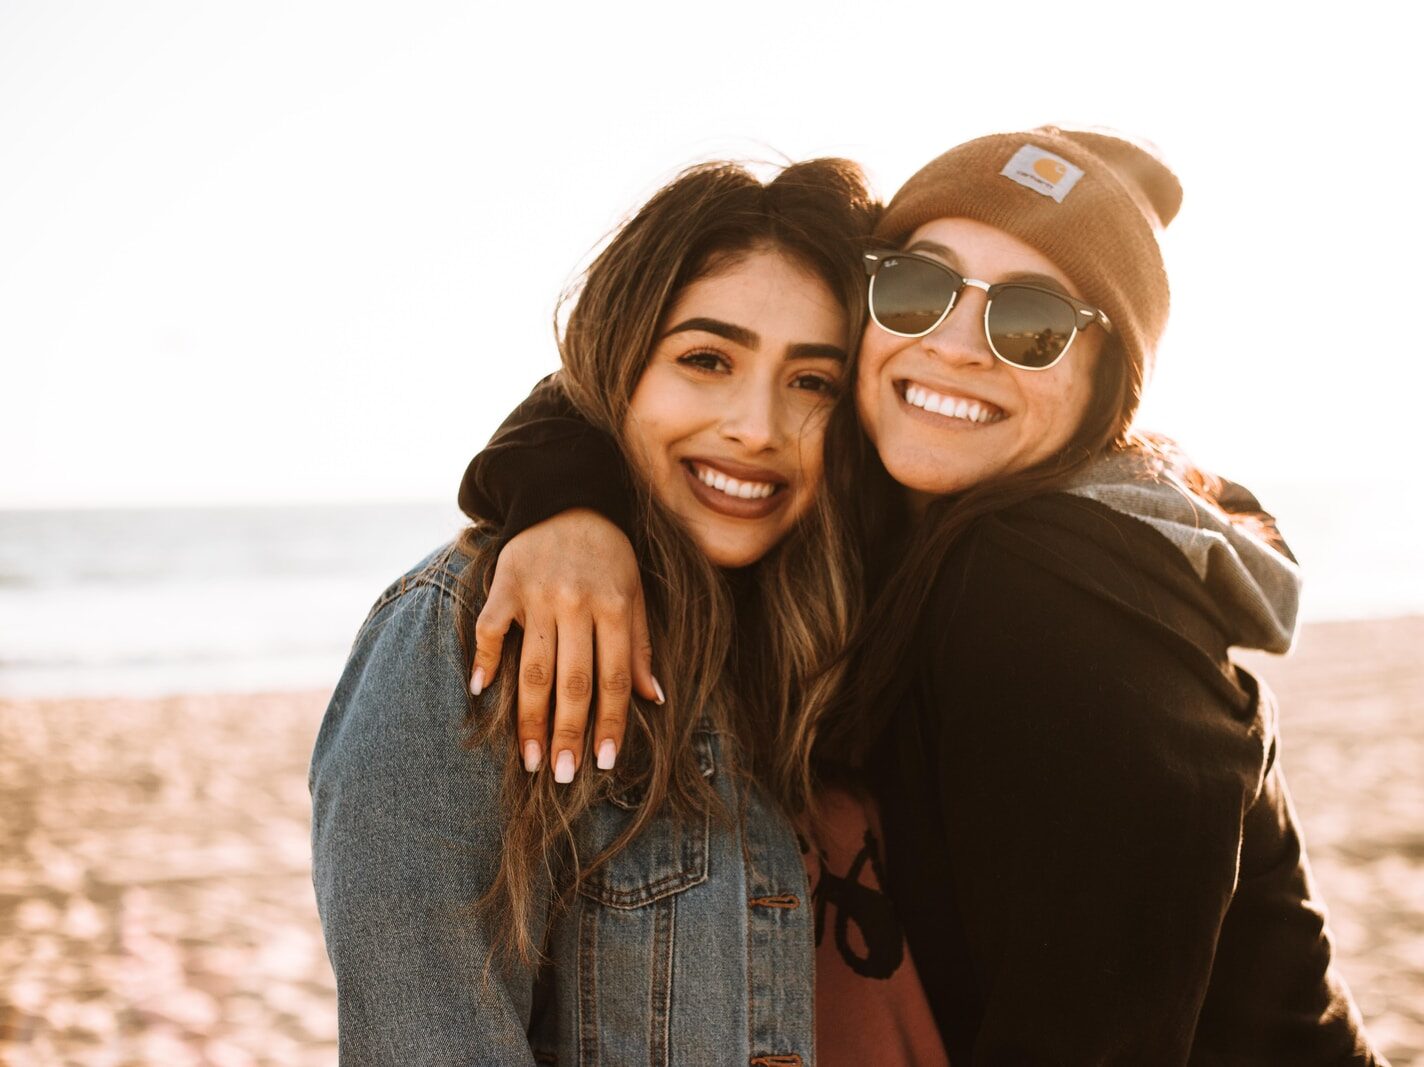 woman hugging other woman while smiling at beach